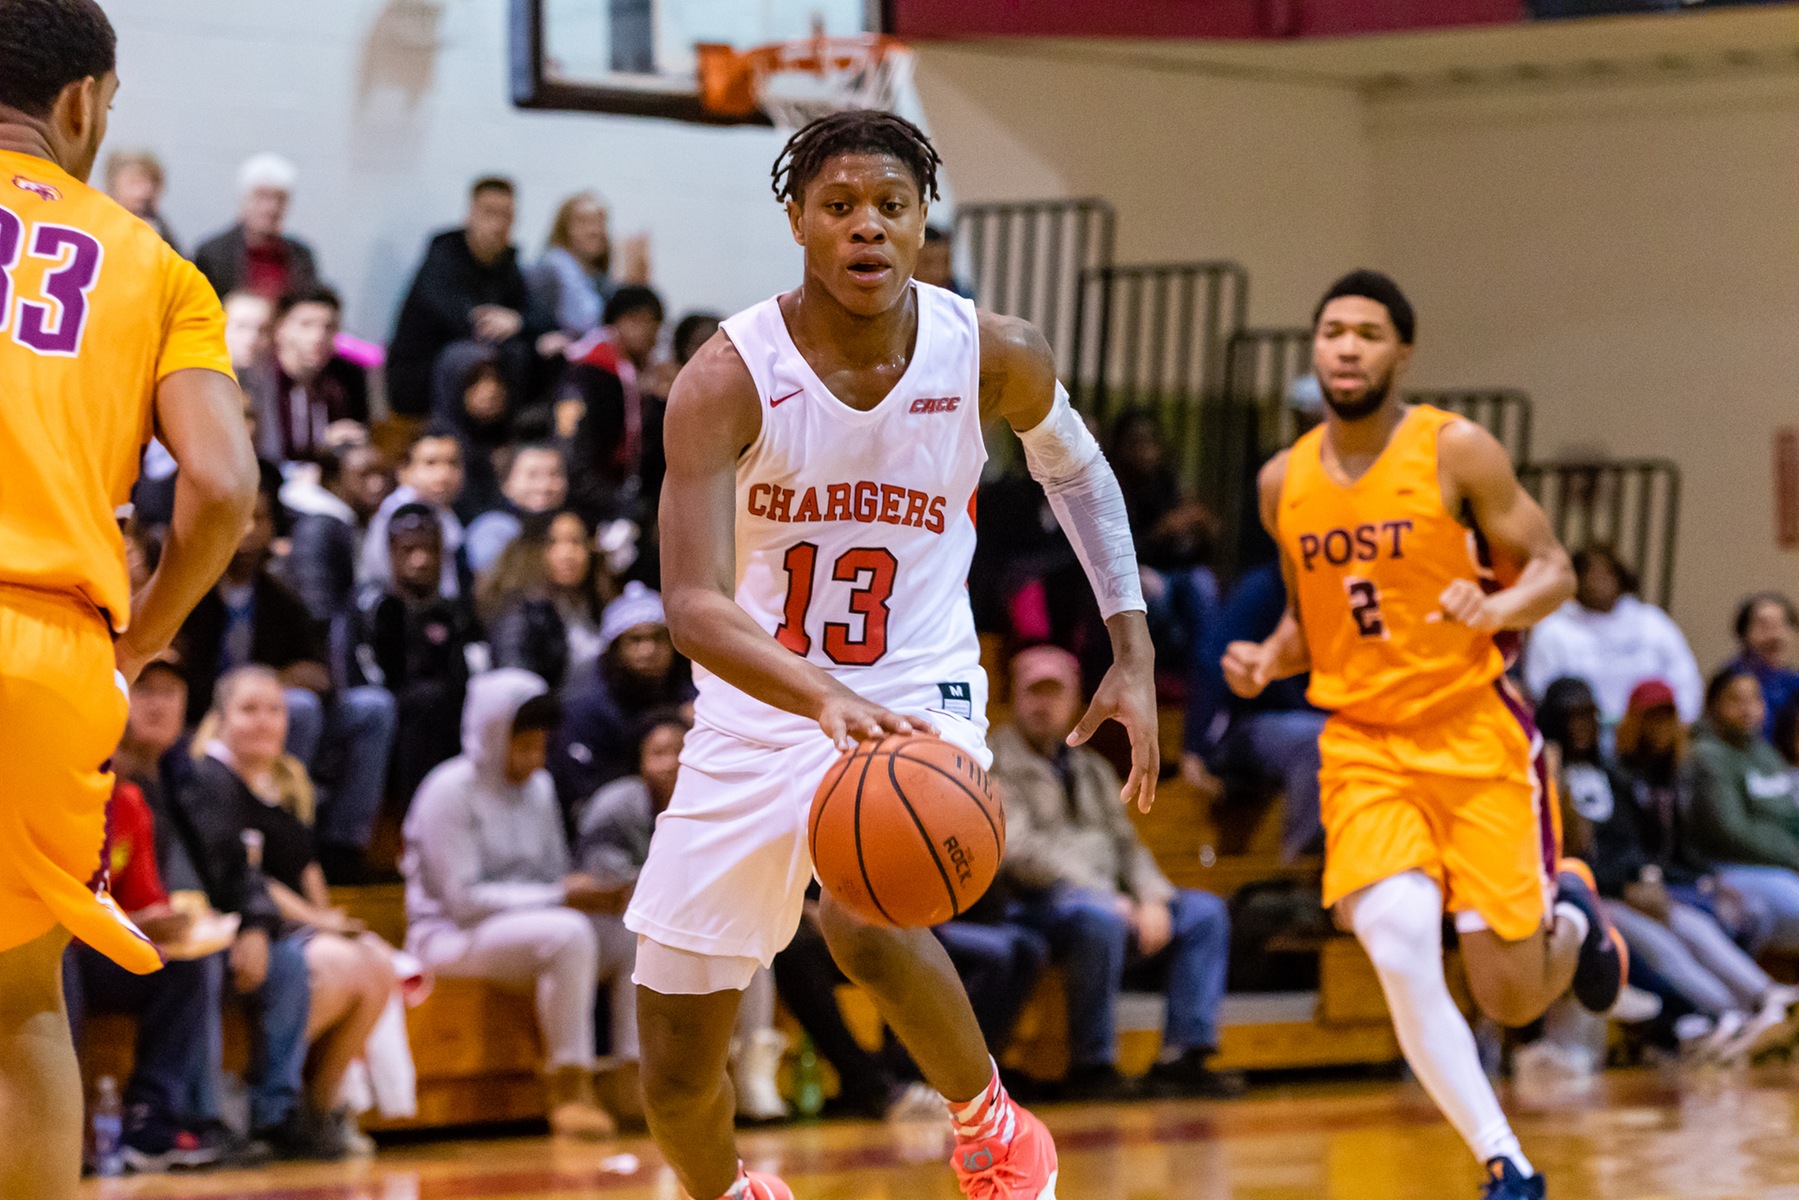 DOMINICAN CHARGES PAST CHESTNUT HILL COLLEGE